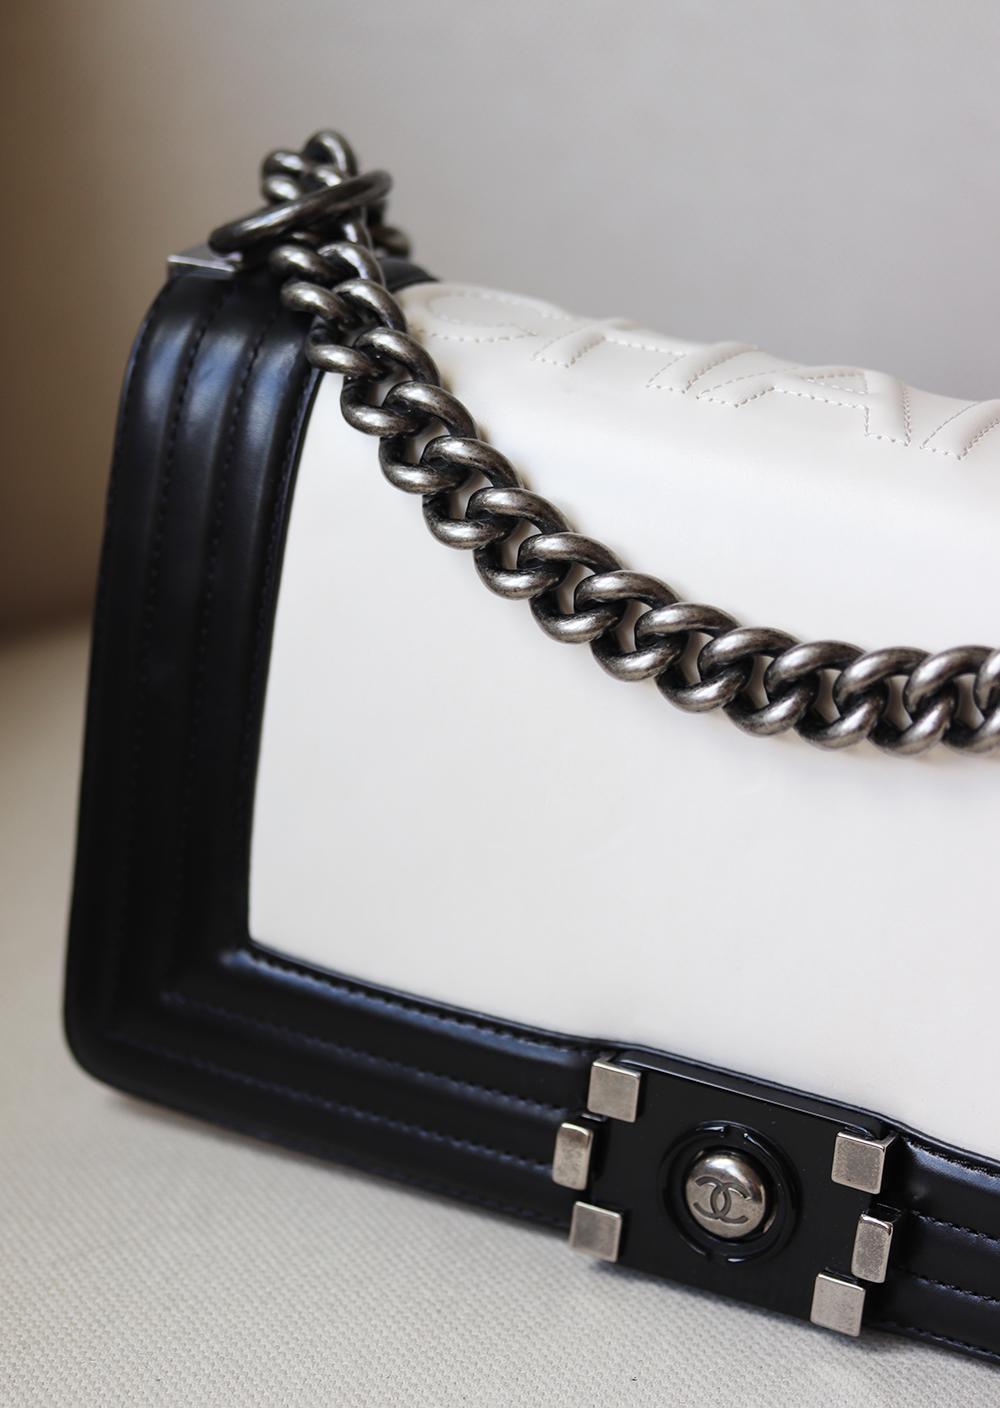 Chanel Glazed Calfskin Leather Boy Flap Bag has been hand-finished by skilled artisans in the label's workshop.
Boasting smooth black and ivory calfskin-leather exterior, this design is accented with silver-toned and black calfskin-leather chain